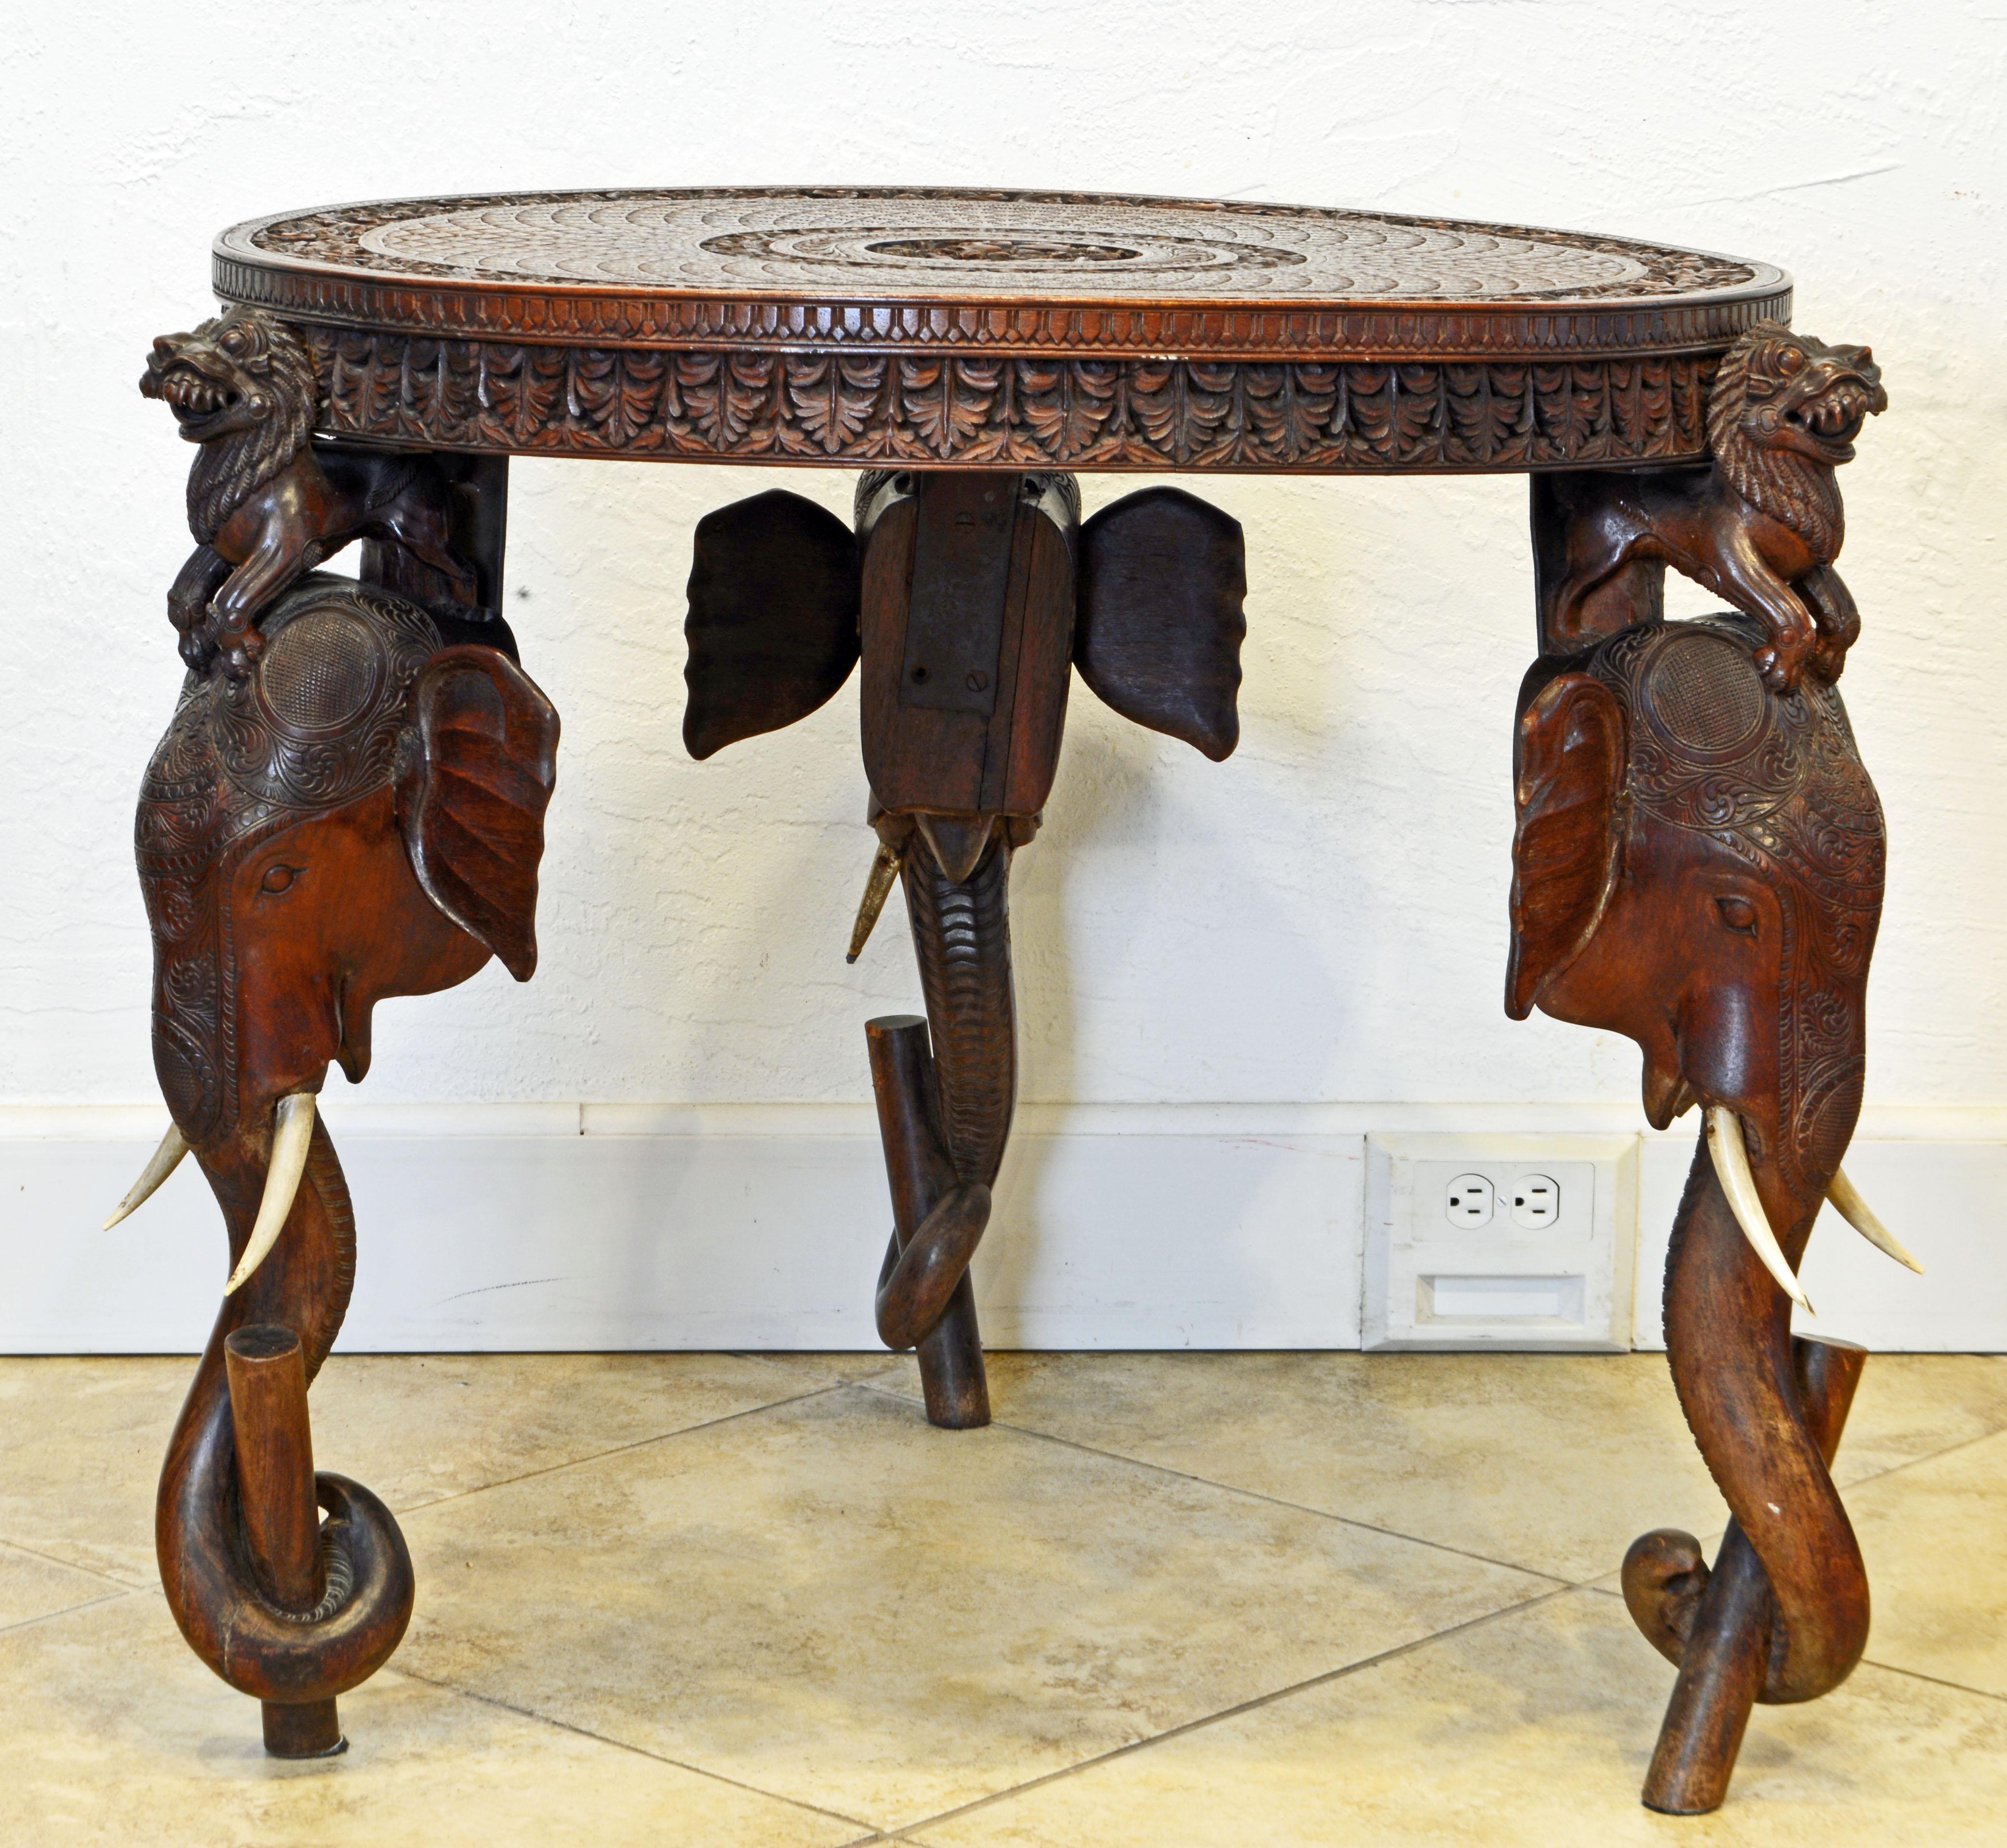 This late 19th century Anglo-Indian side table features an intricately carved apron and top centering a Hindu goddess flanked by two elephants supported by three legs with carved lions sitting on elephant heads with faux tusks and wide spread ears.